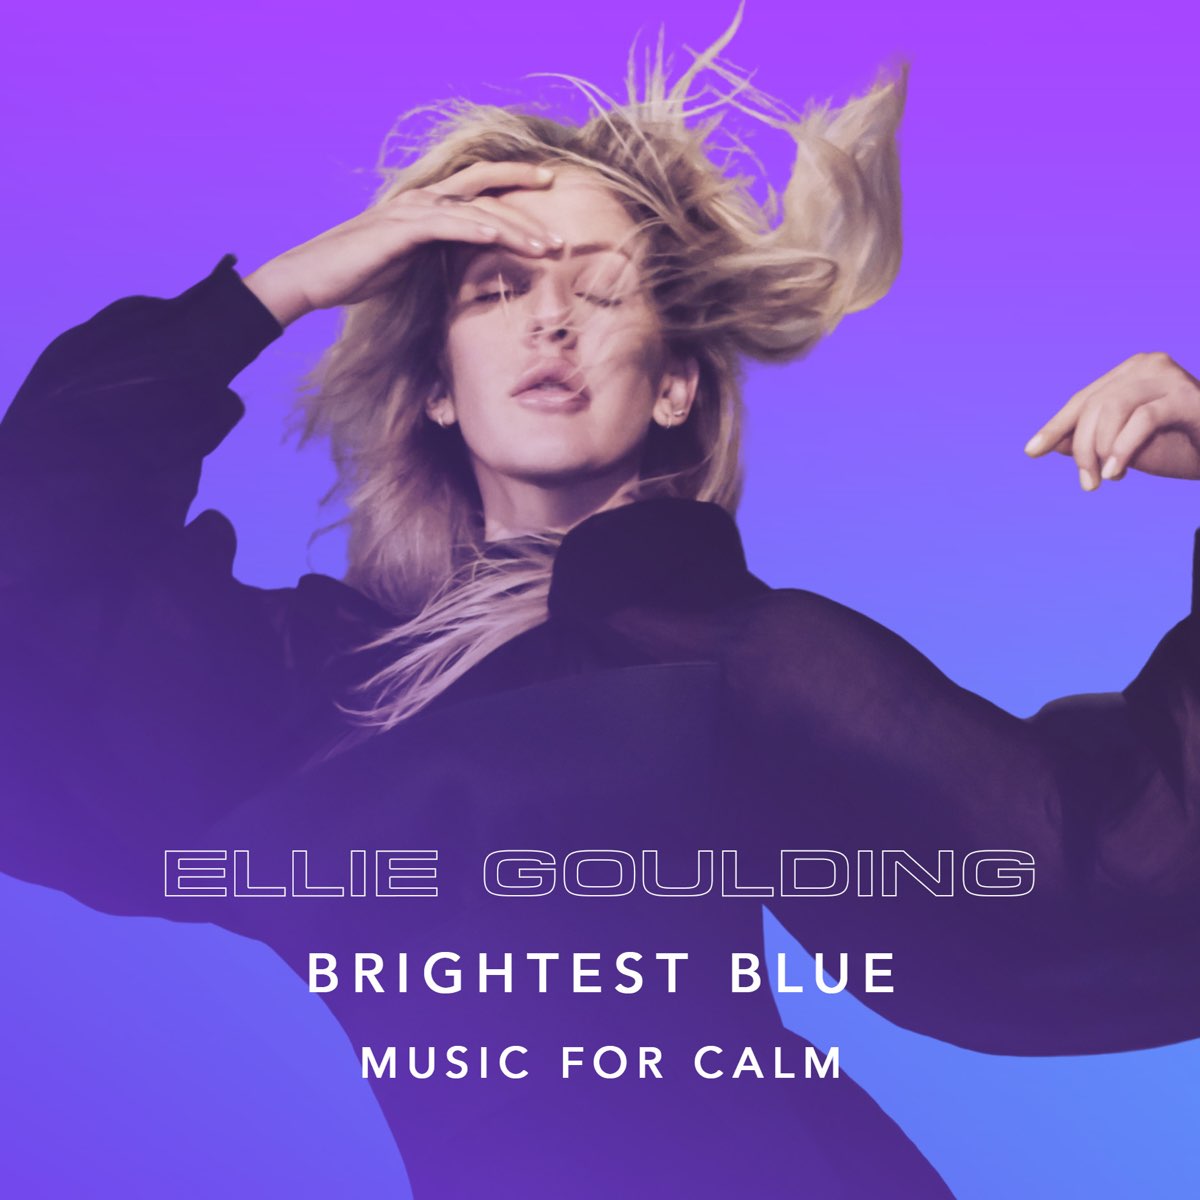 ‎Brightest Blue - Music for Calm - Album by Ellie Goulding - Apple Music